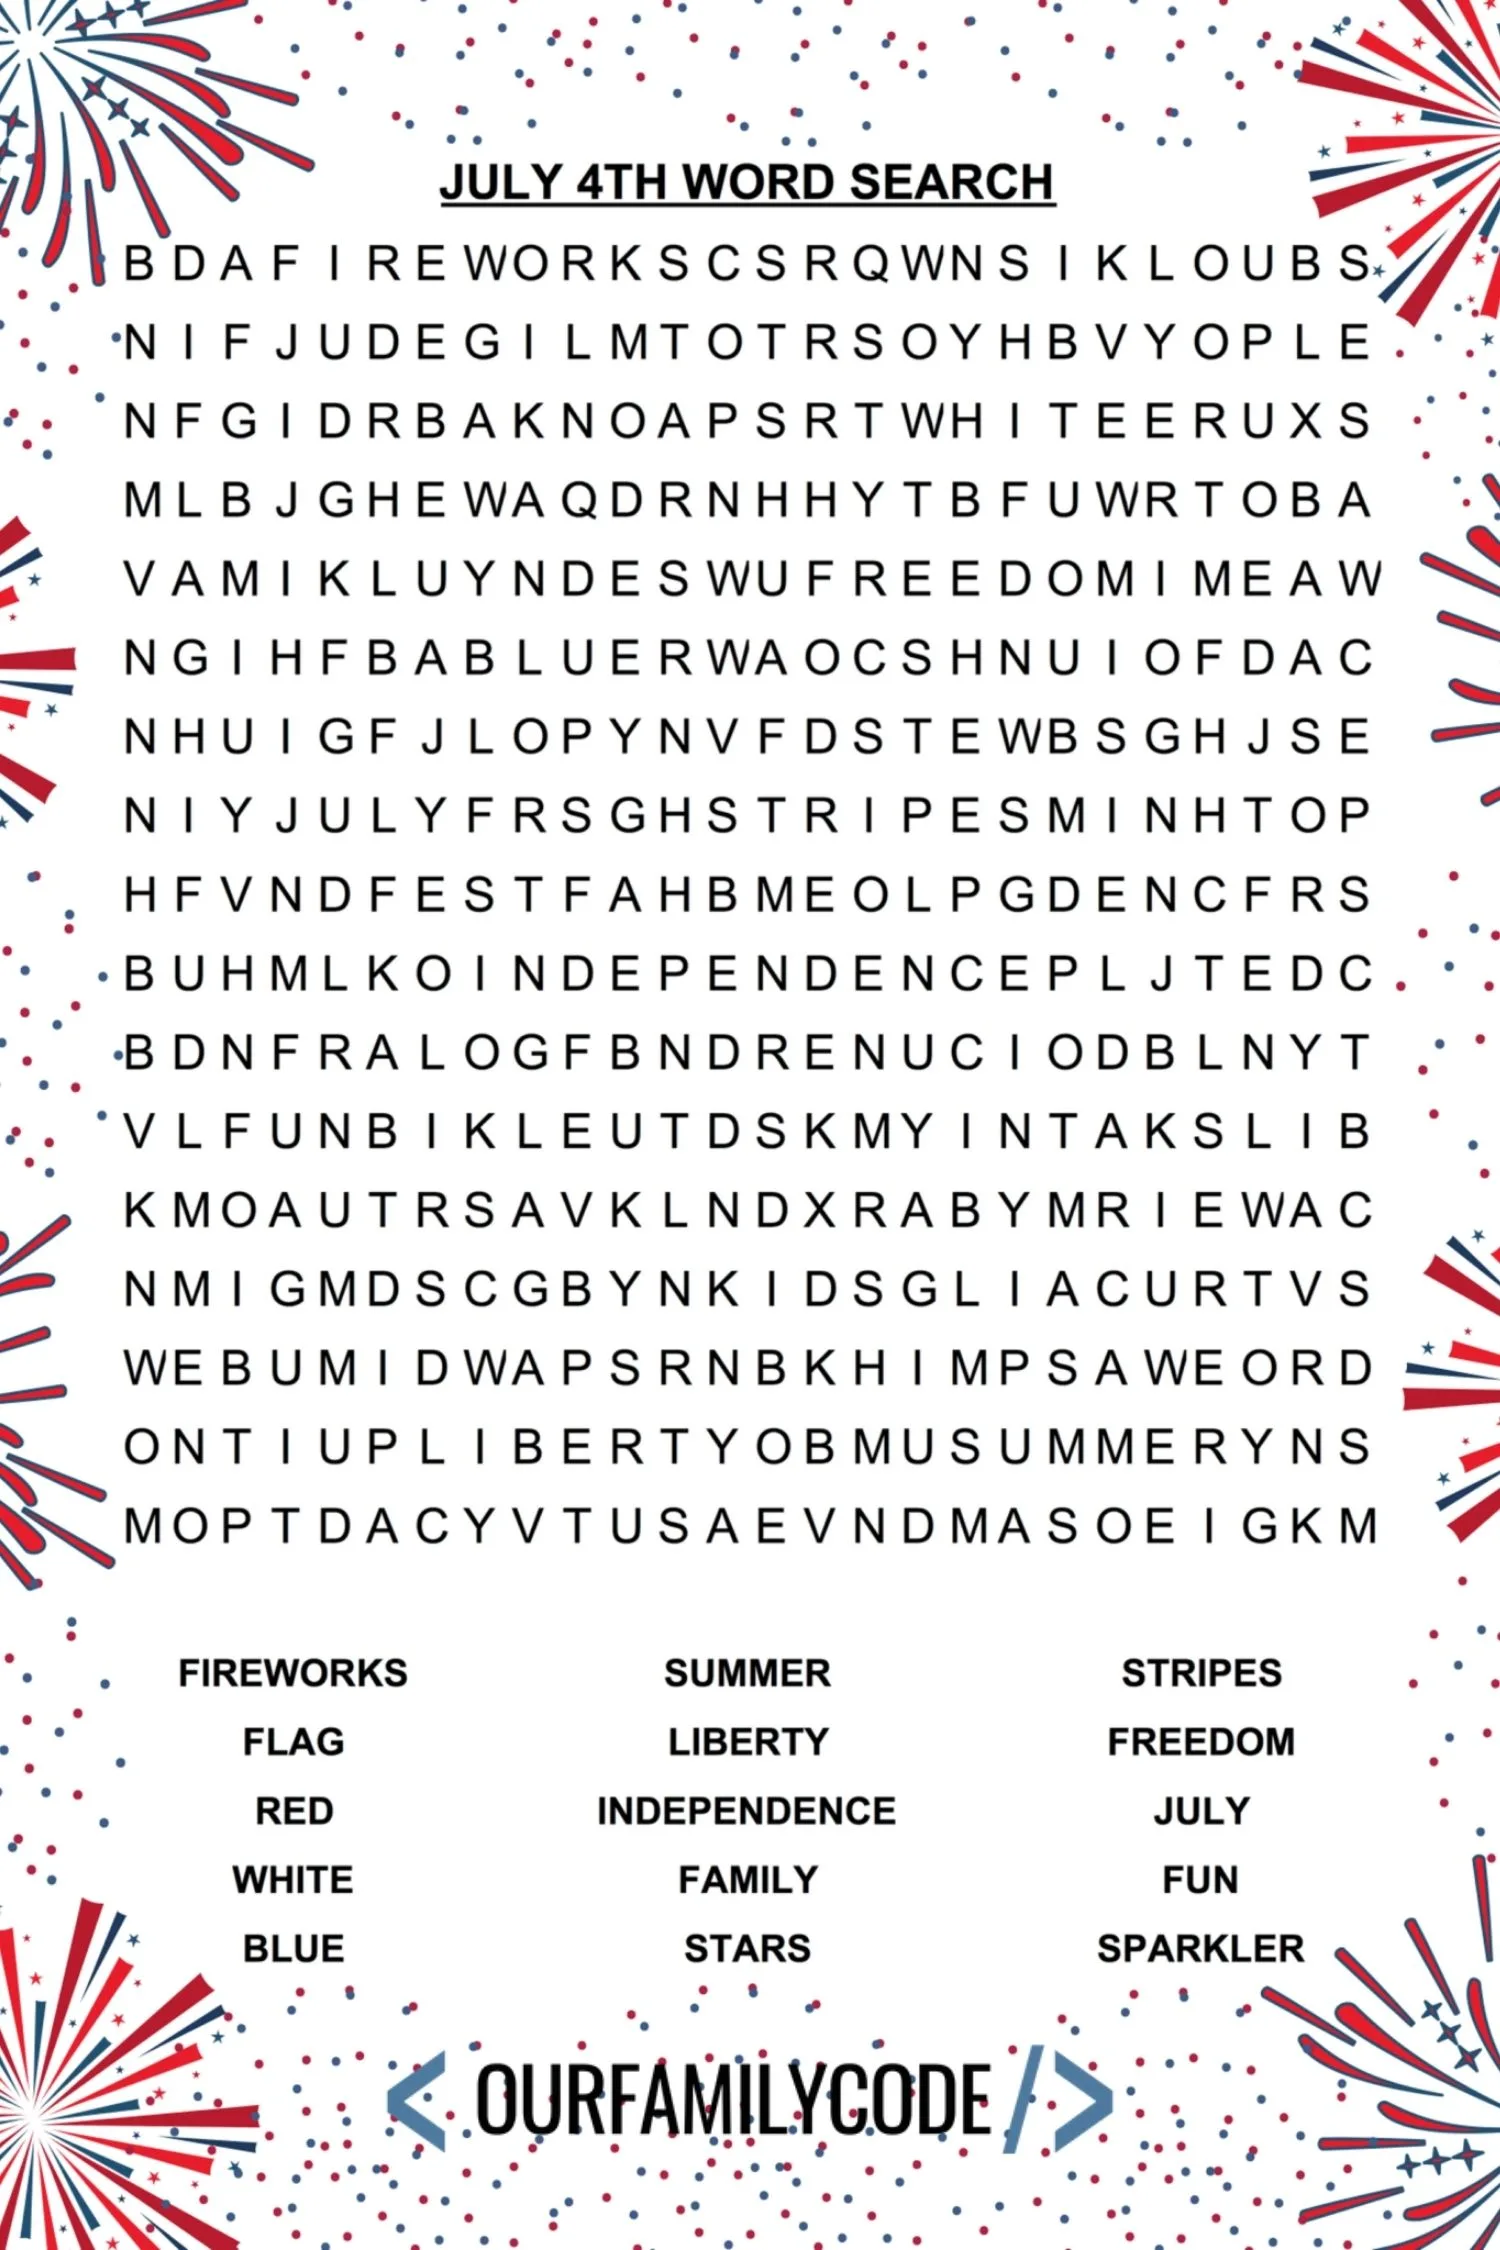 A picture of a july 4th word search with fireworks background.